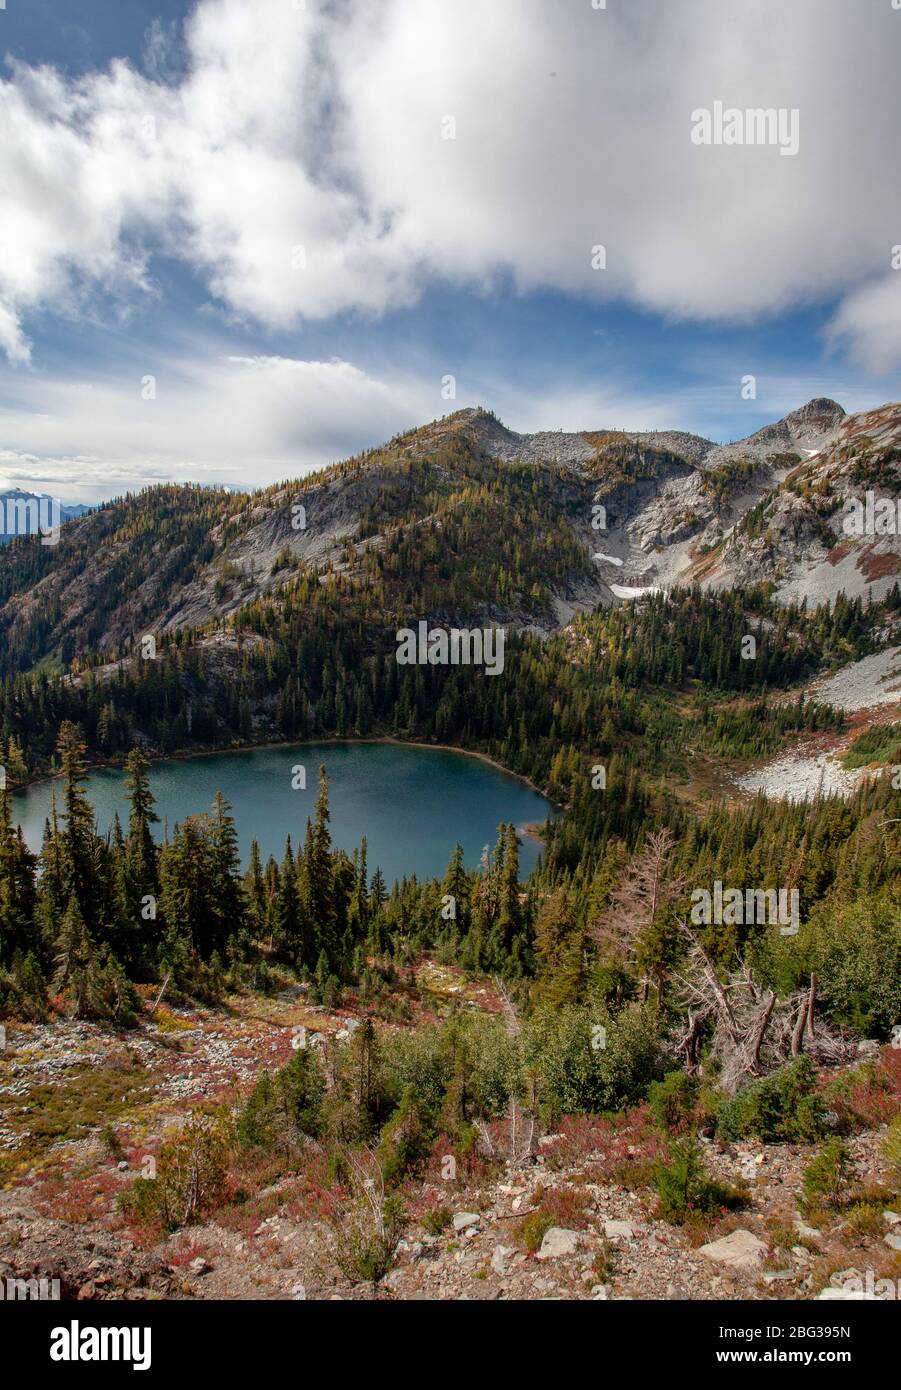 A mountain lake in a basin is visible from the side of a mountain, surrounded by Western larch trees, under a blue sky with white and light grey cloud Stock Photo